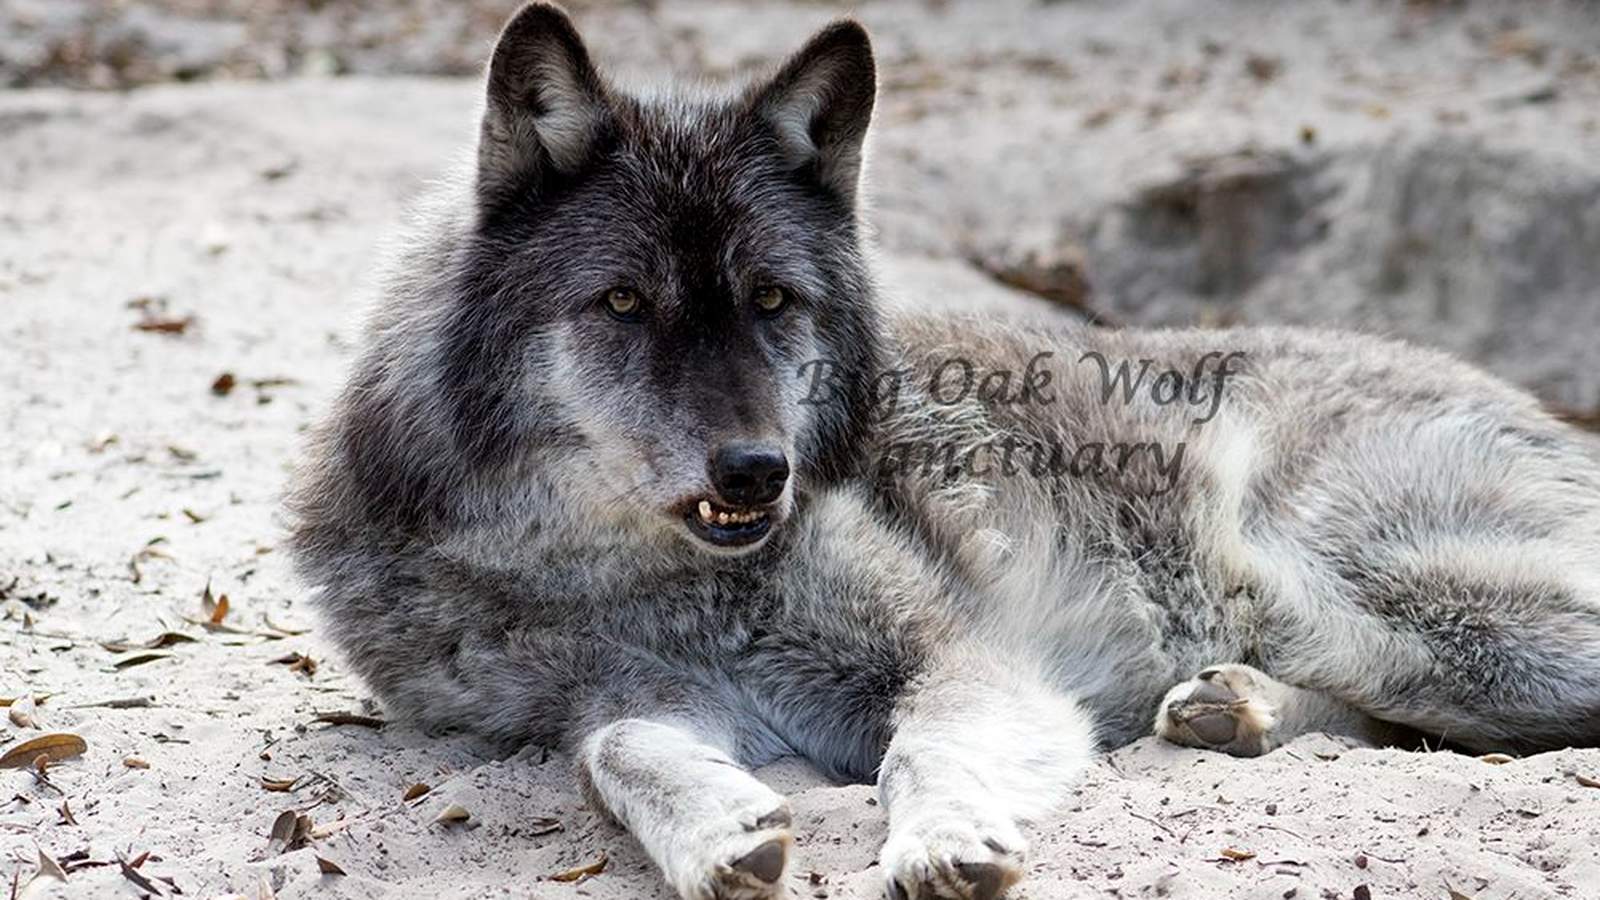 New Year’s Eve fireworks blamed for death of wolf at Clay County sanctuary